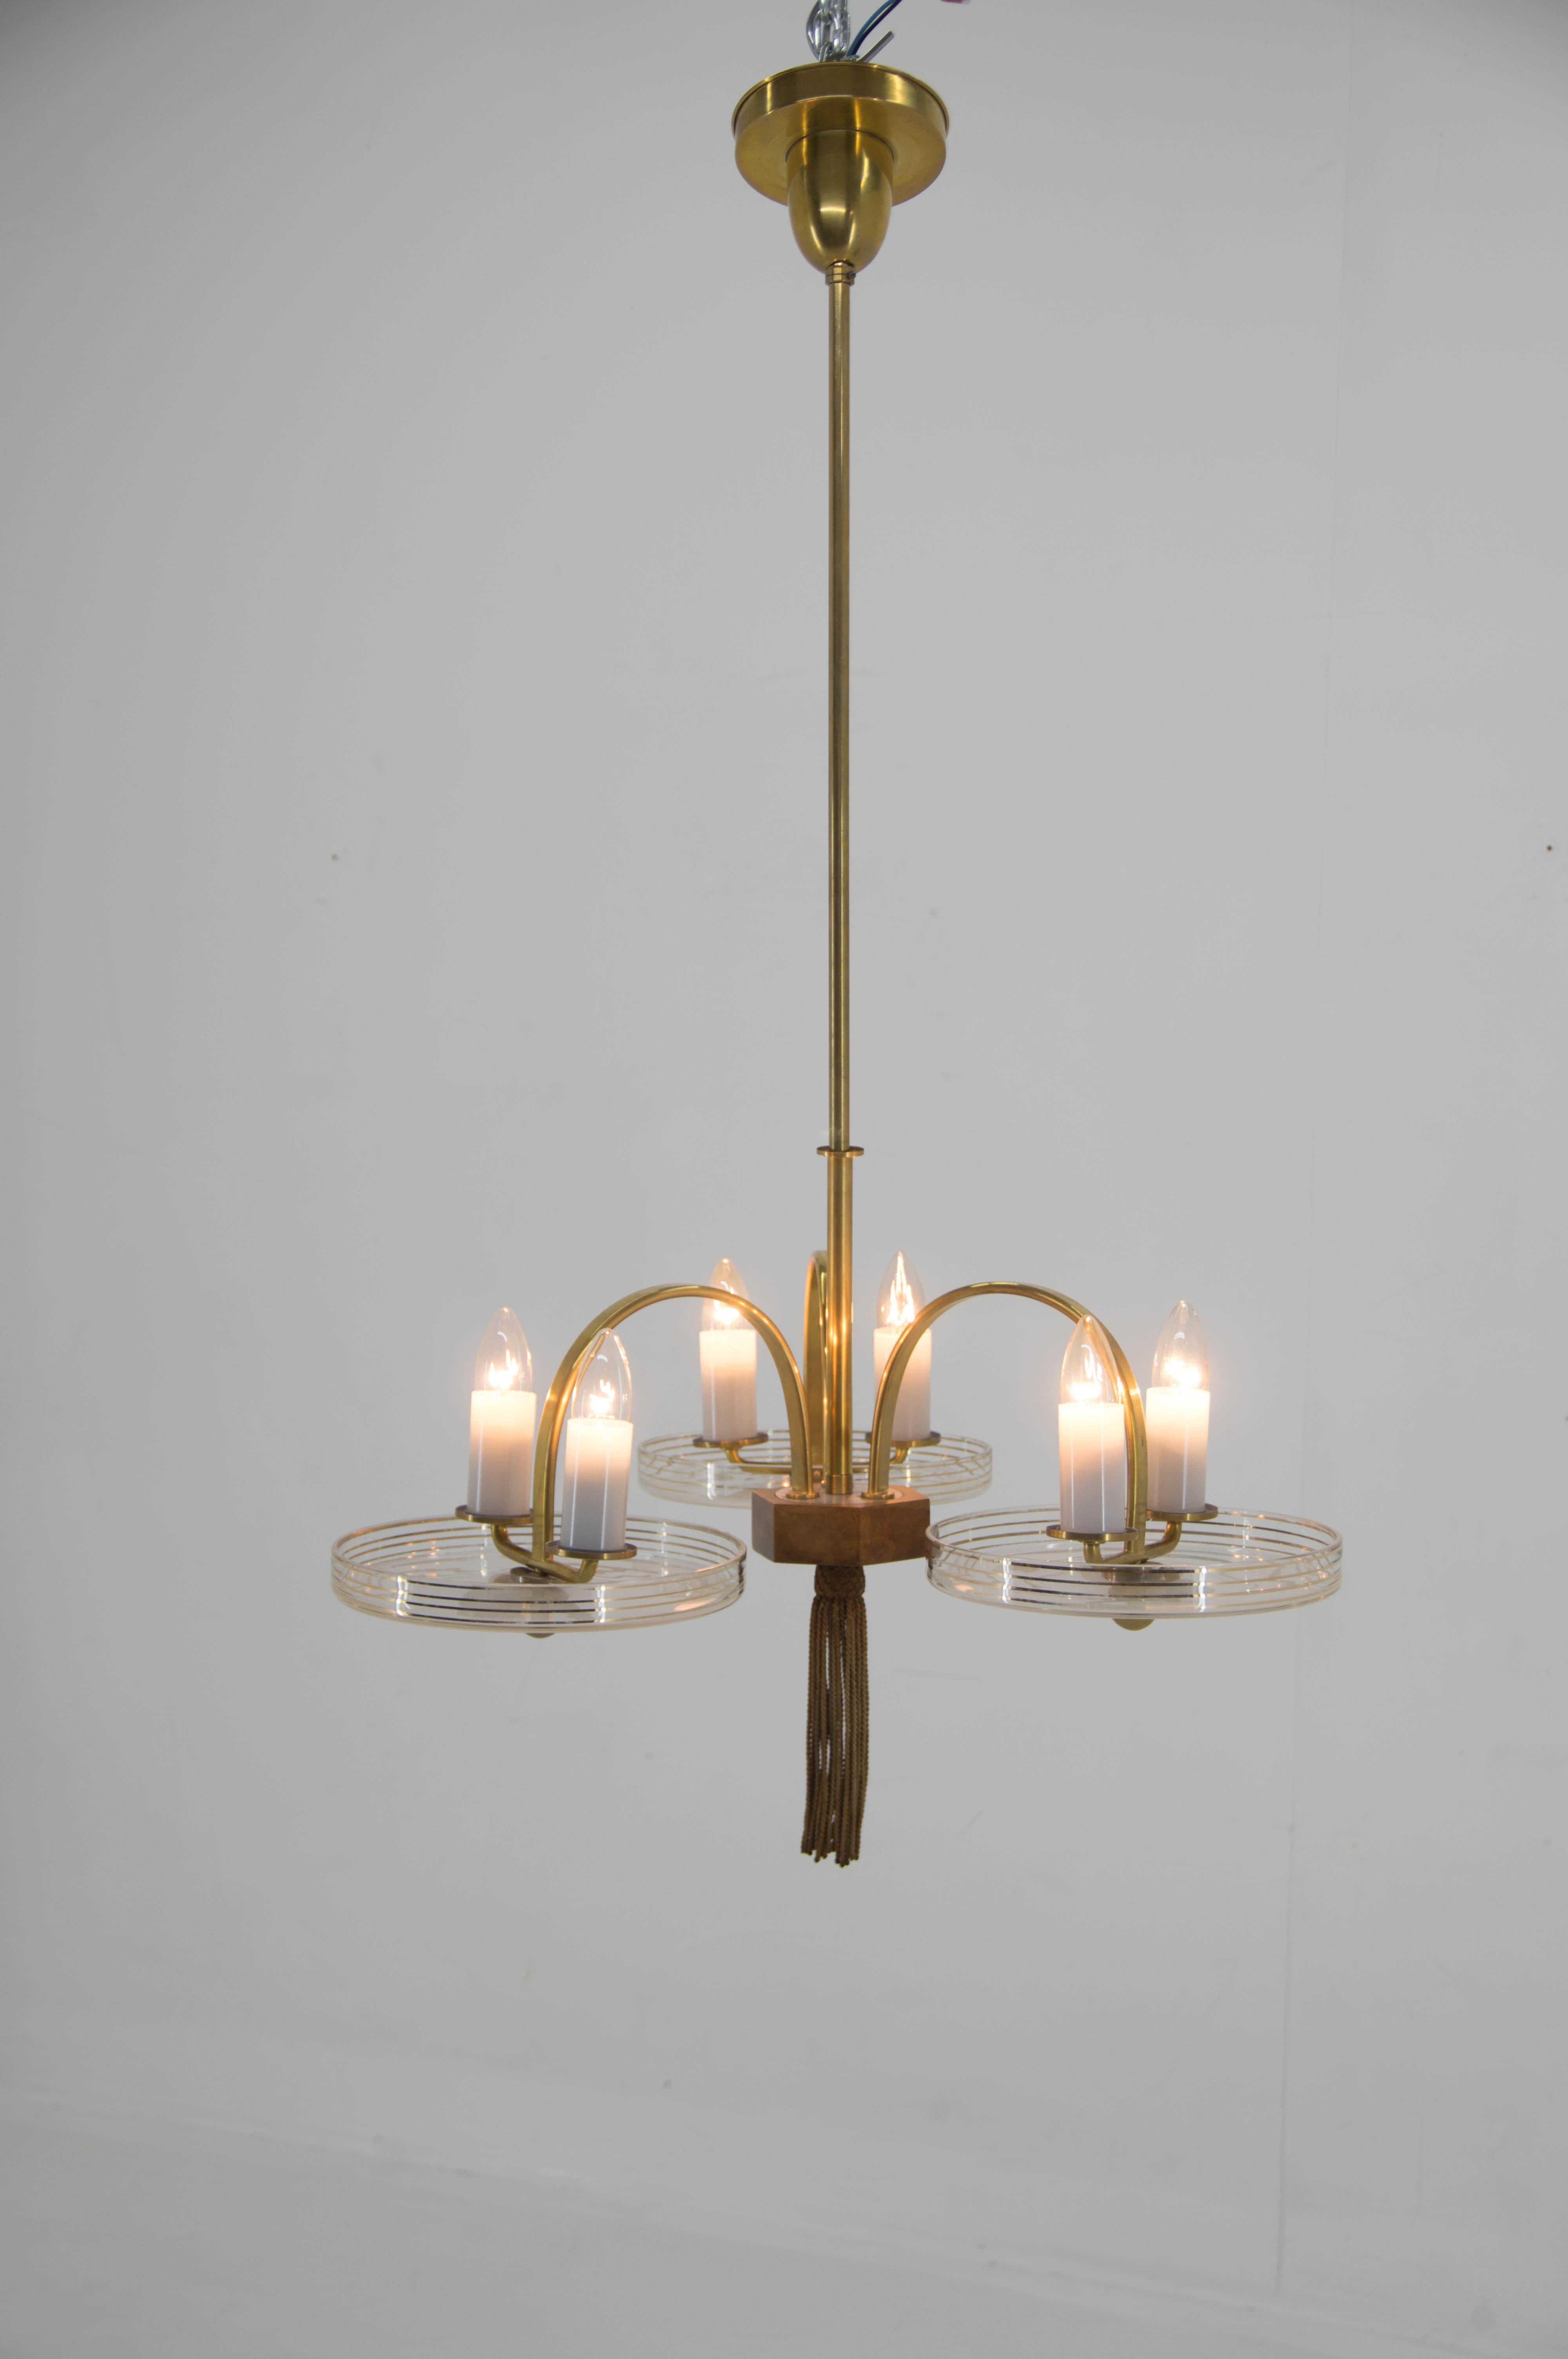 Unique restored Art Deco chandelier made in Czechoslovakia in 1940s.
Cleaned, polished, rewired:
6x40W E12-E14 bulbs
US wiring compatible